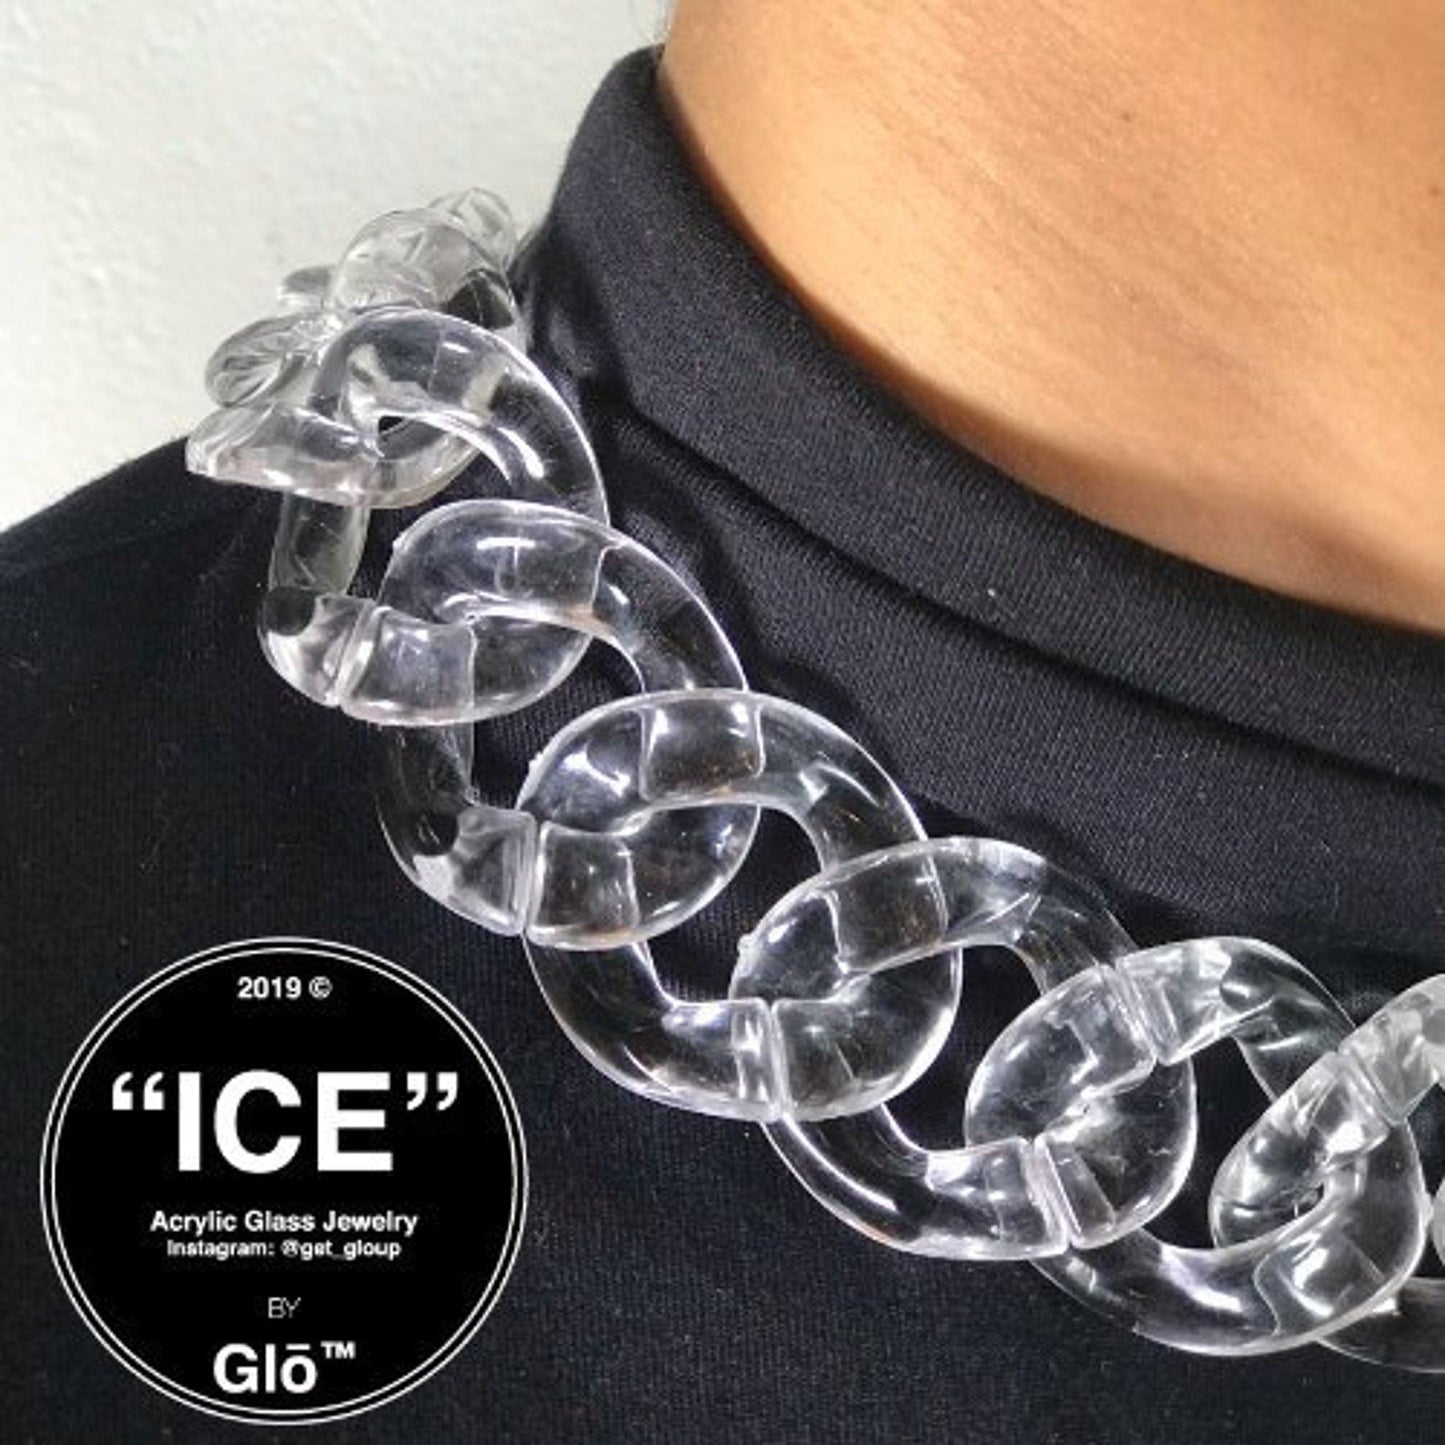 Clear XL Curb Link Choker. Acrylic glass Chain. Necklace - plushtrap_